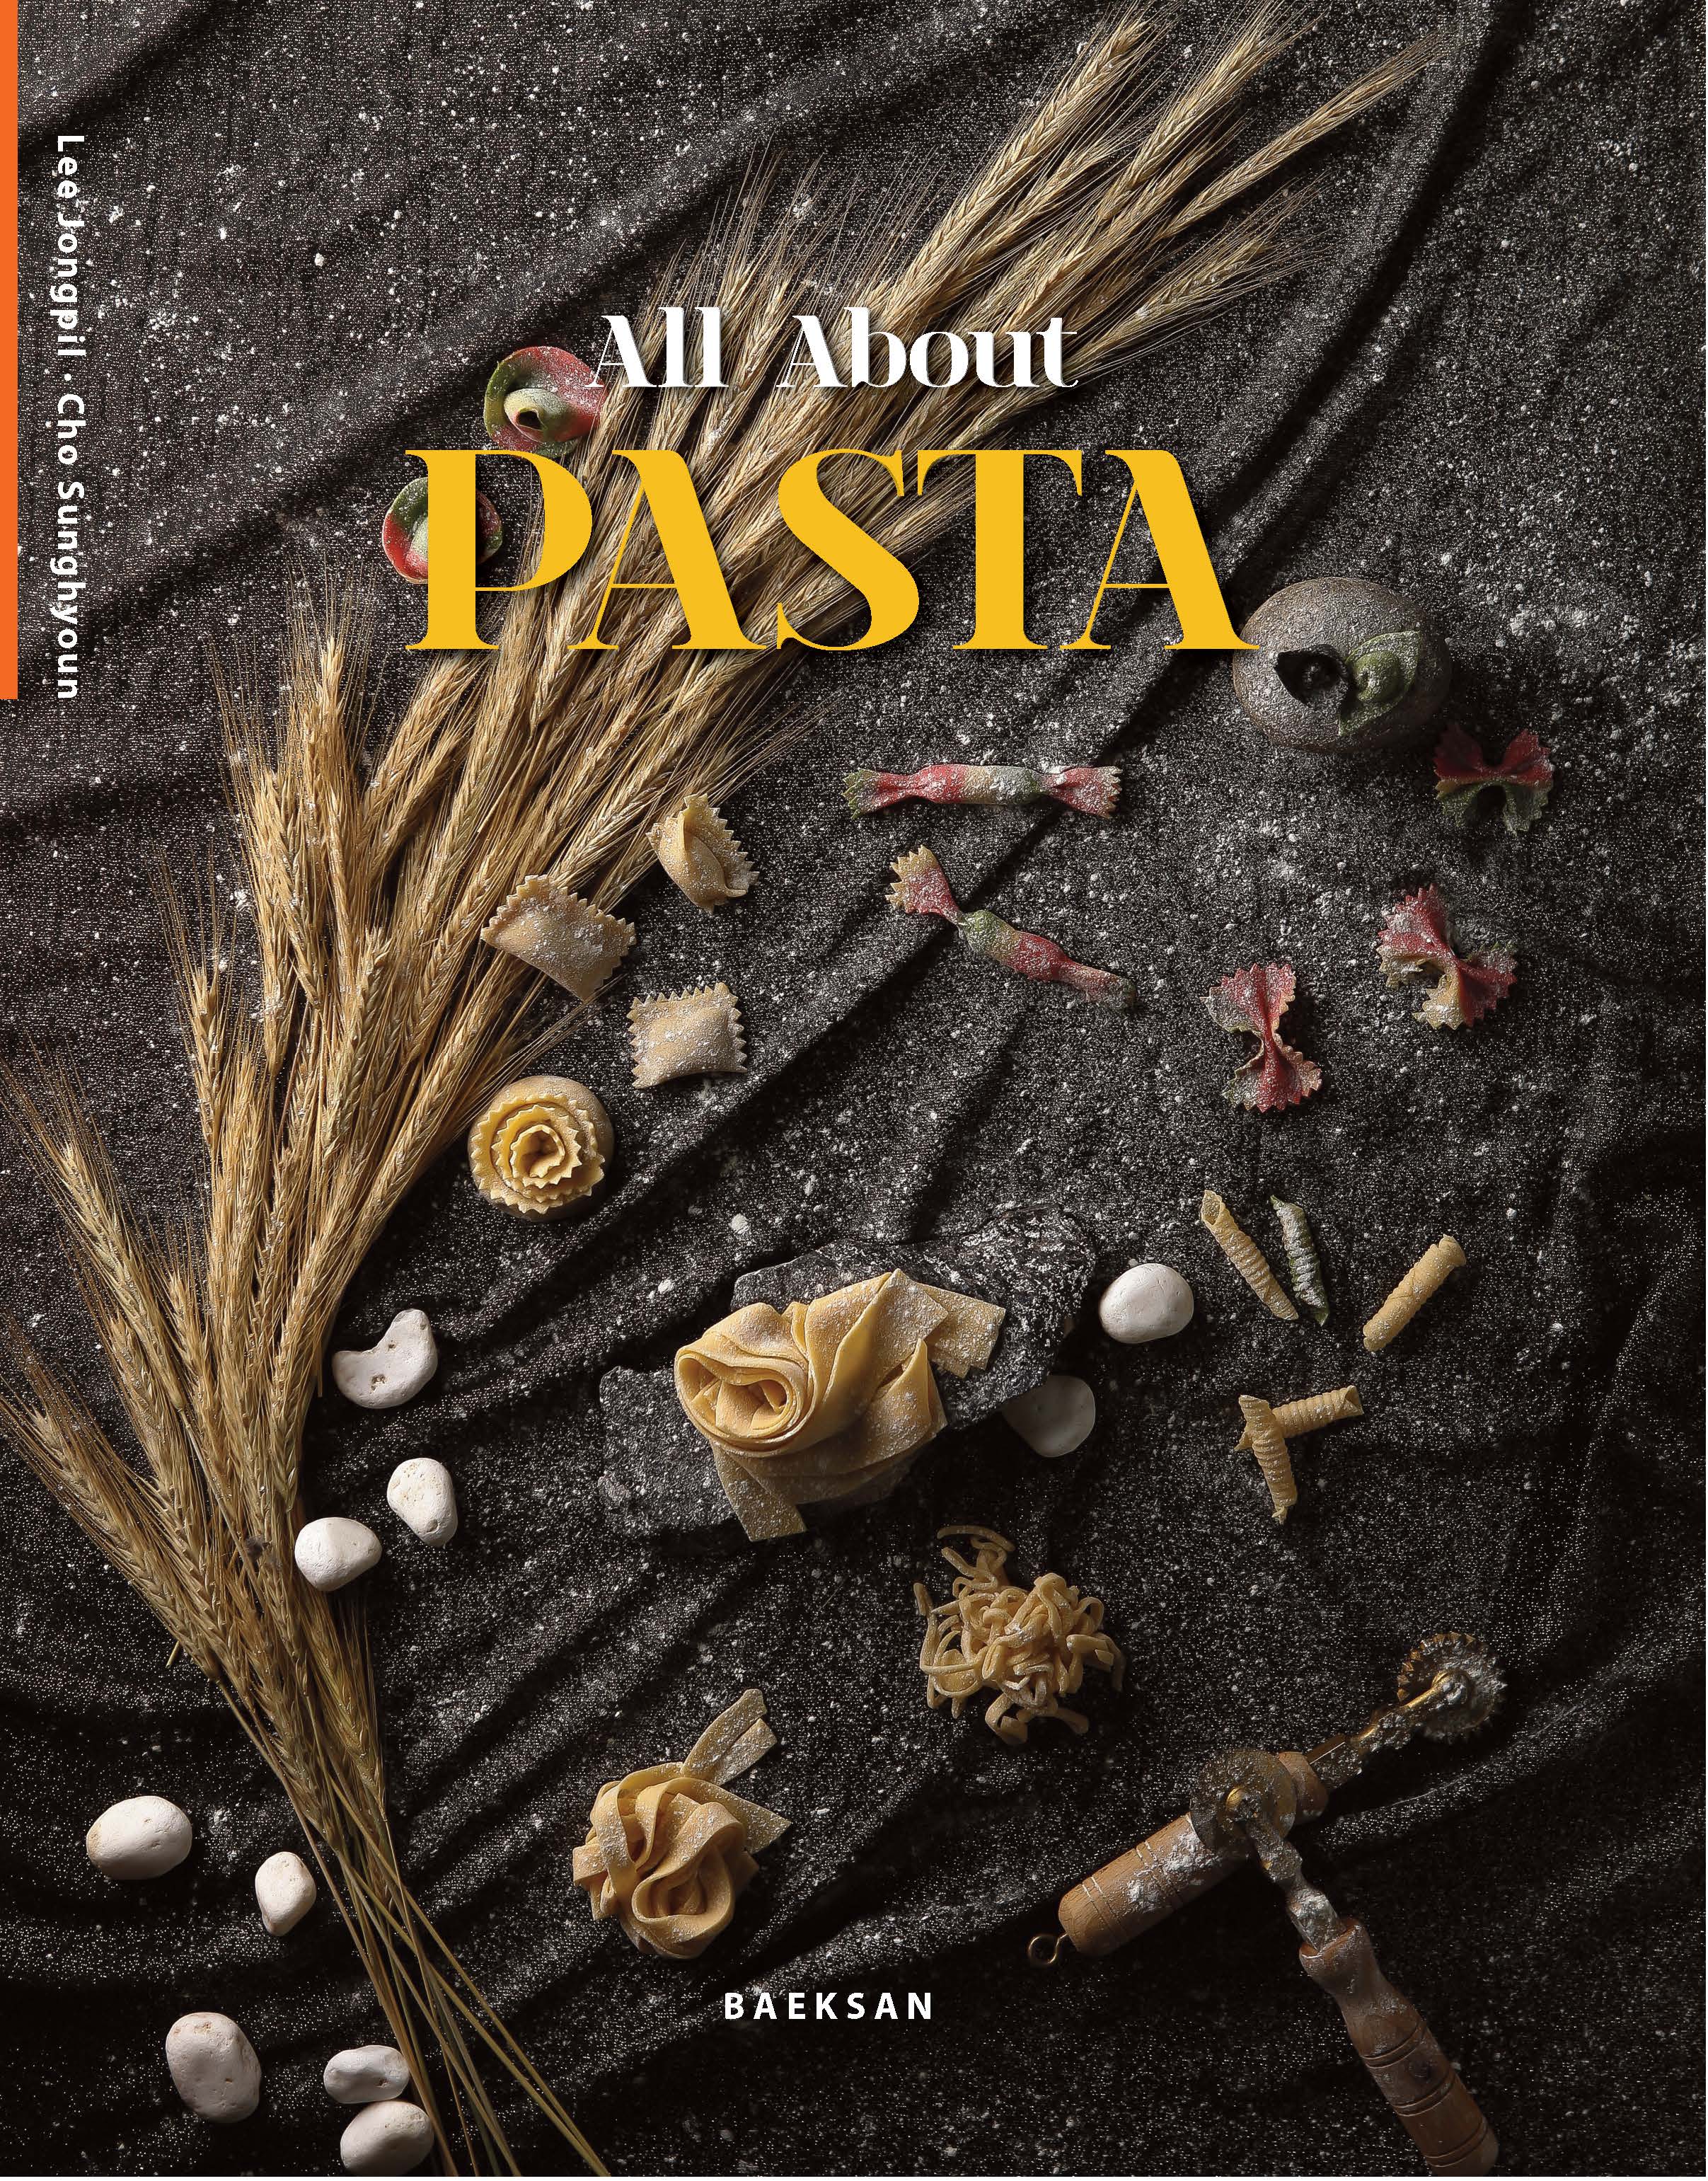 (All about) pasta